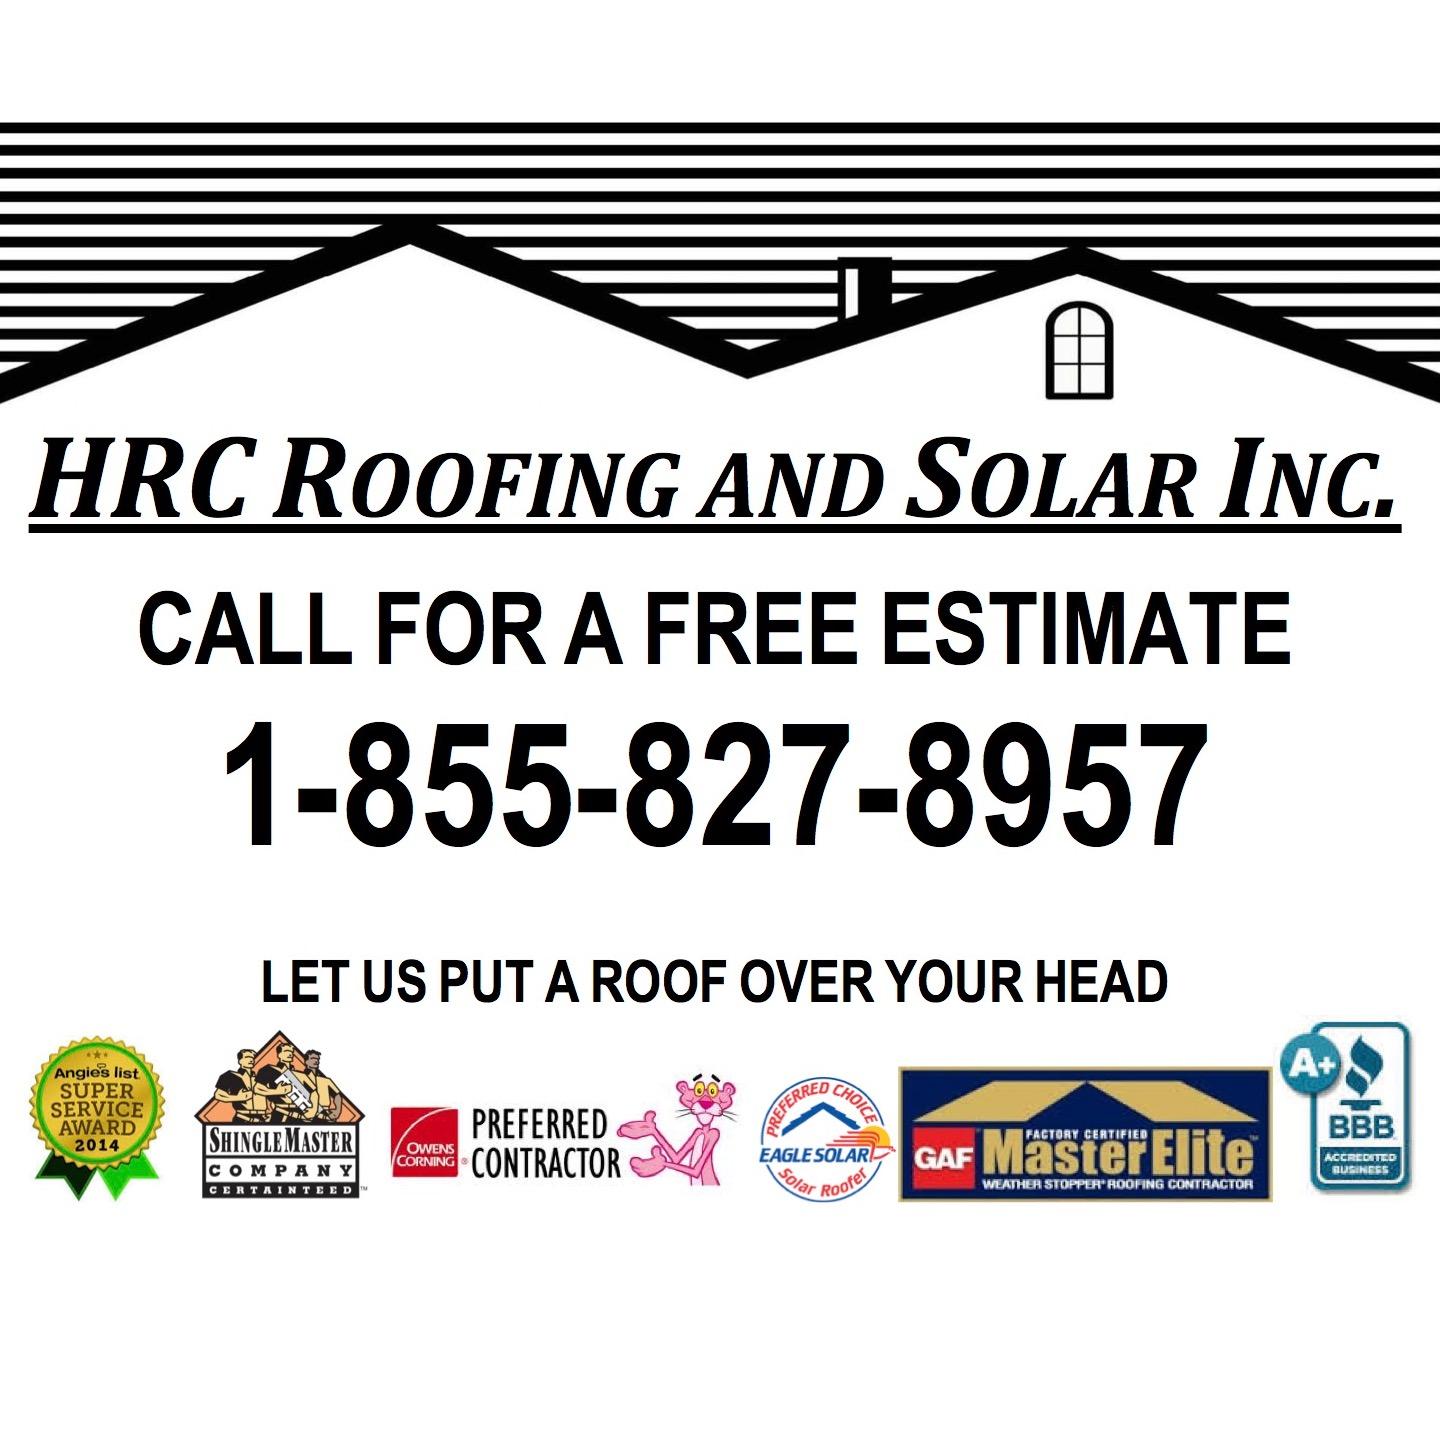 HRC Roofing and Solar Inc. - San Lorenzo, CA 94580 - (510)827-8957 | ShowMeLocal.com